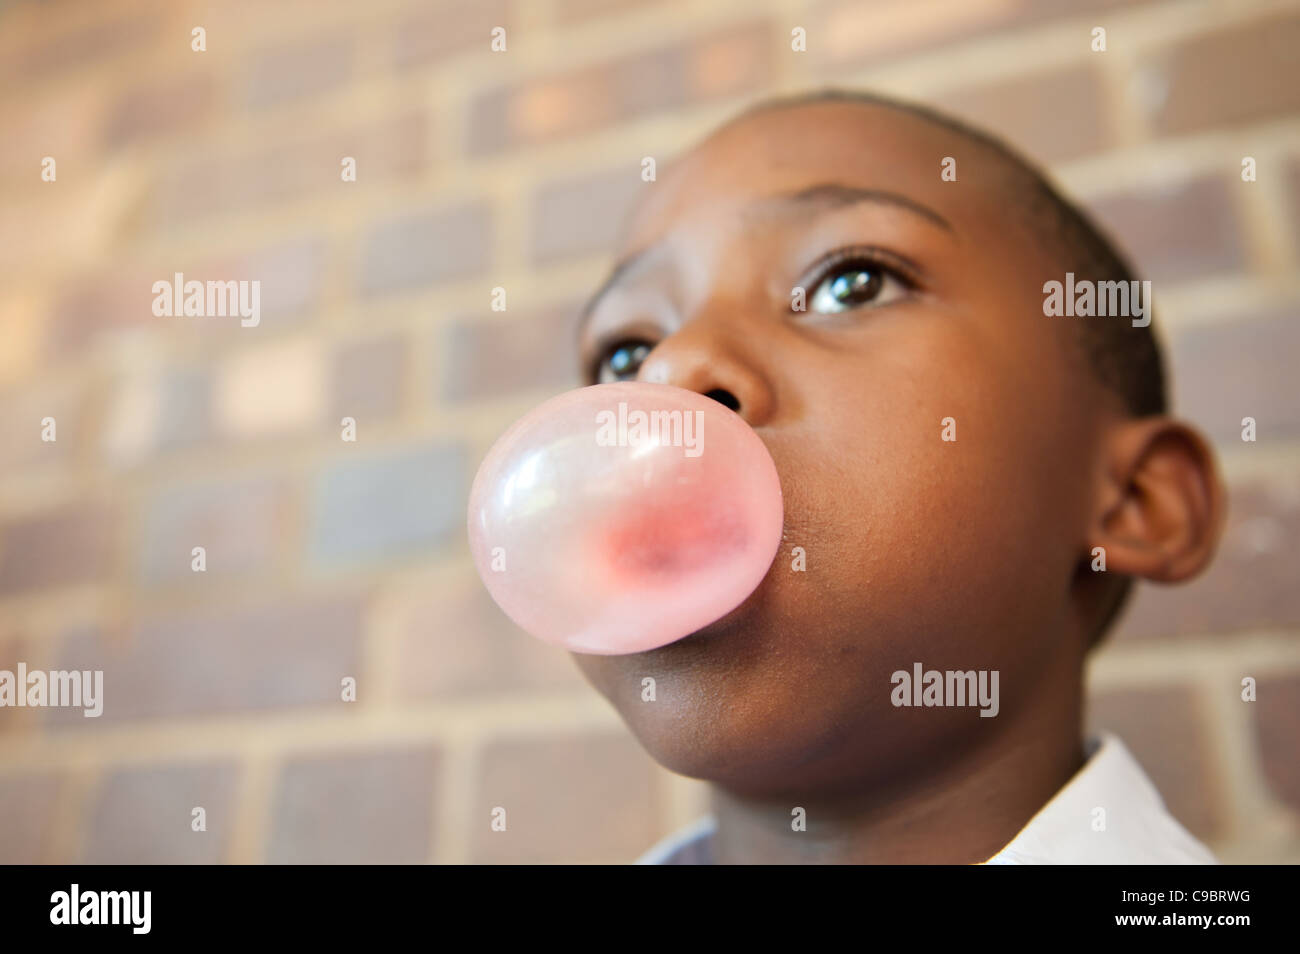 Boy blowing bubble with chewing gum, Johannesburg, Gauteng Province, South Africa Stock Photo